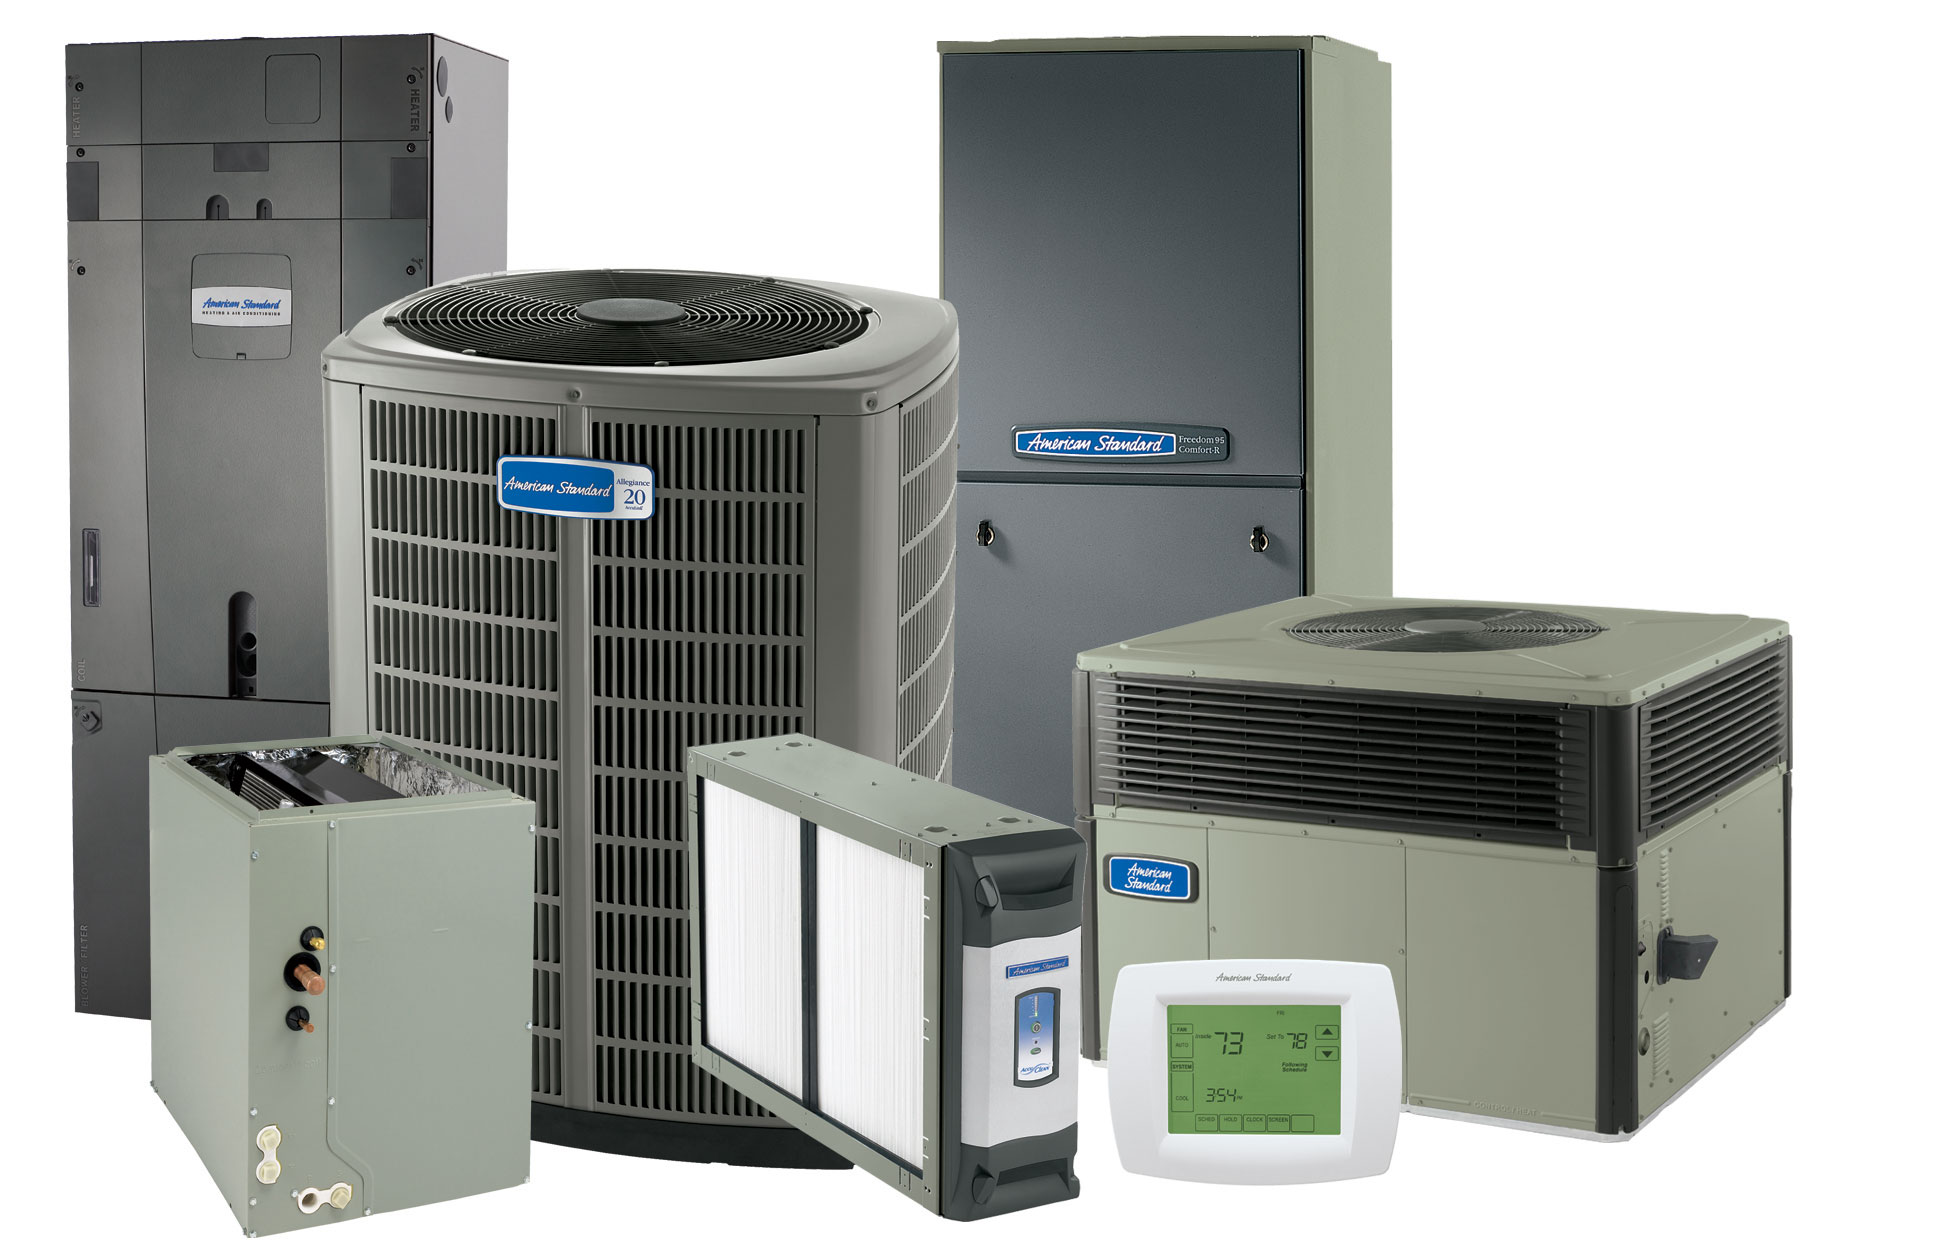 Who Makes American Standard Air Conditioning Units